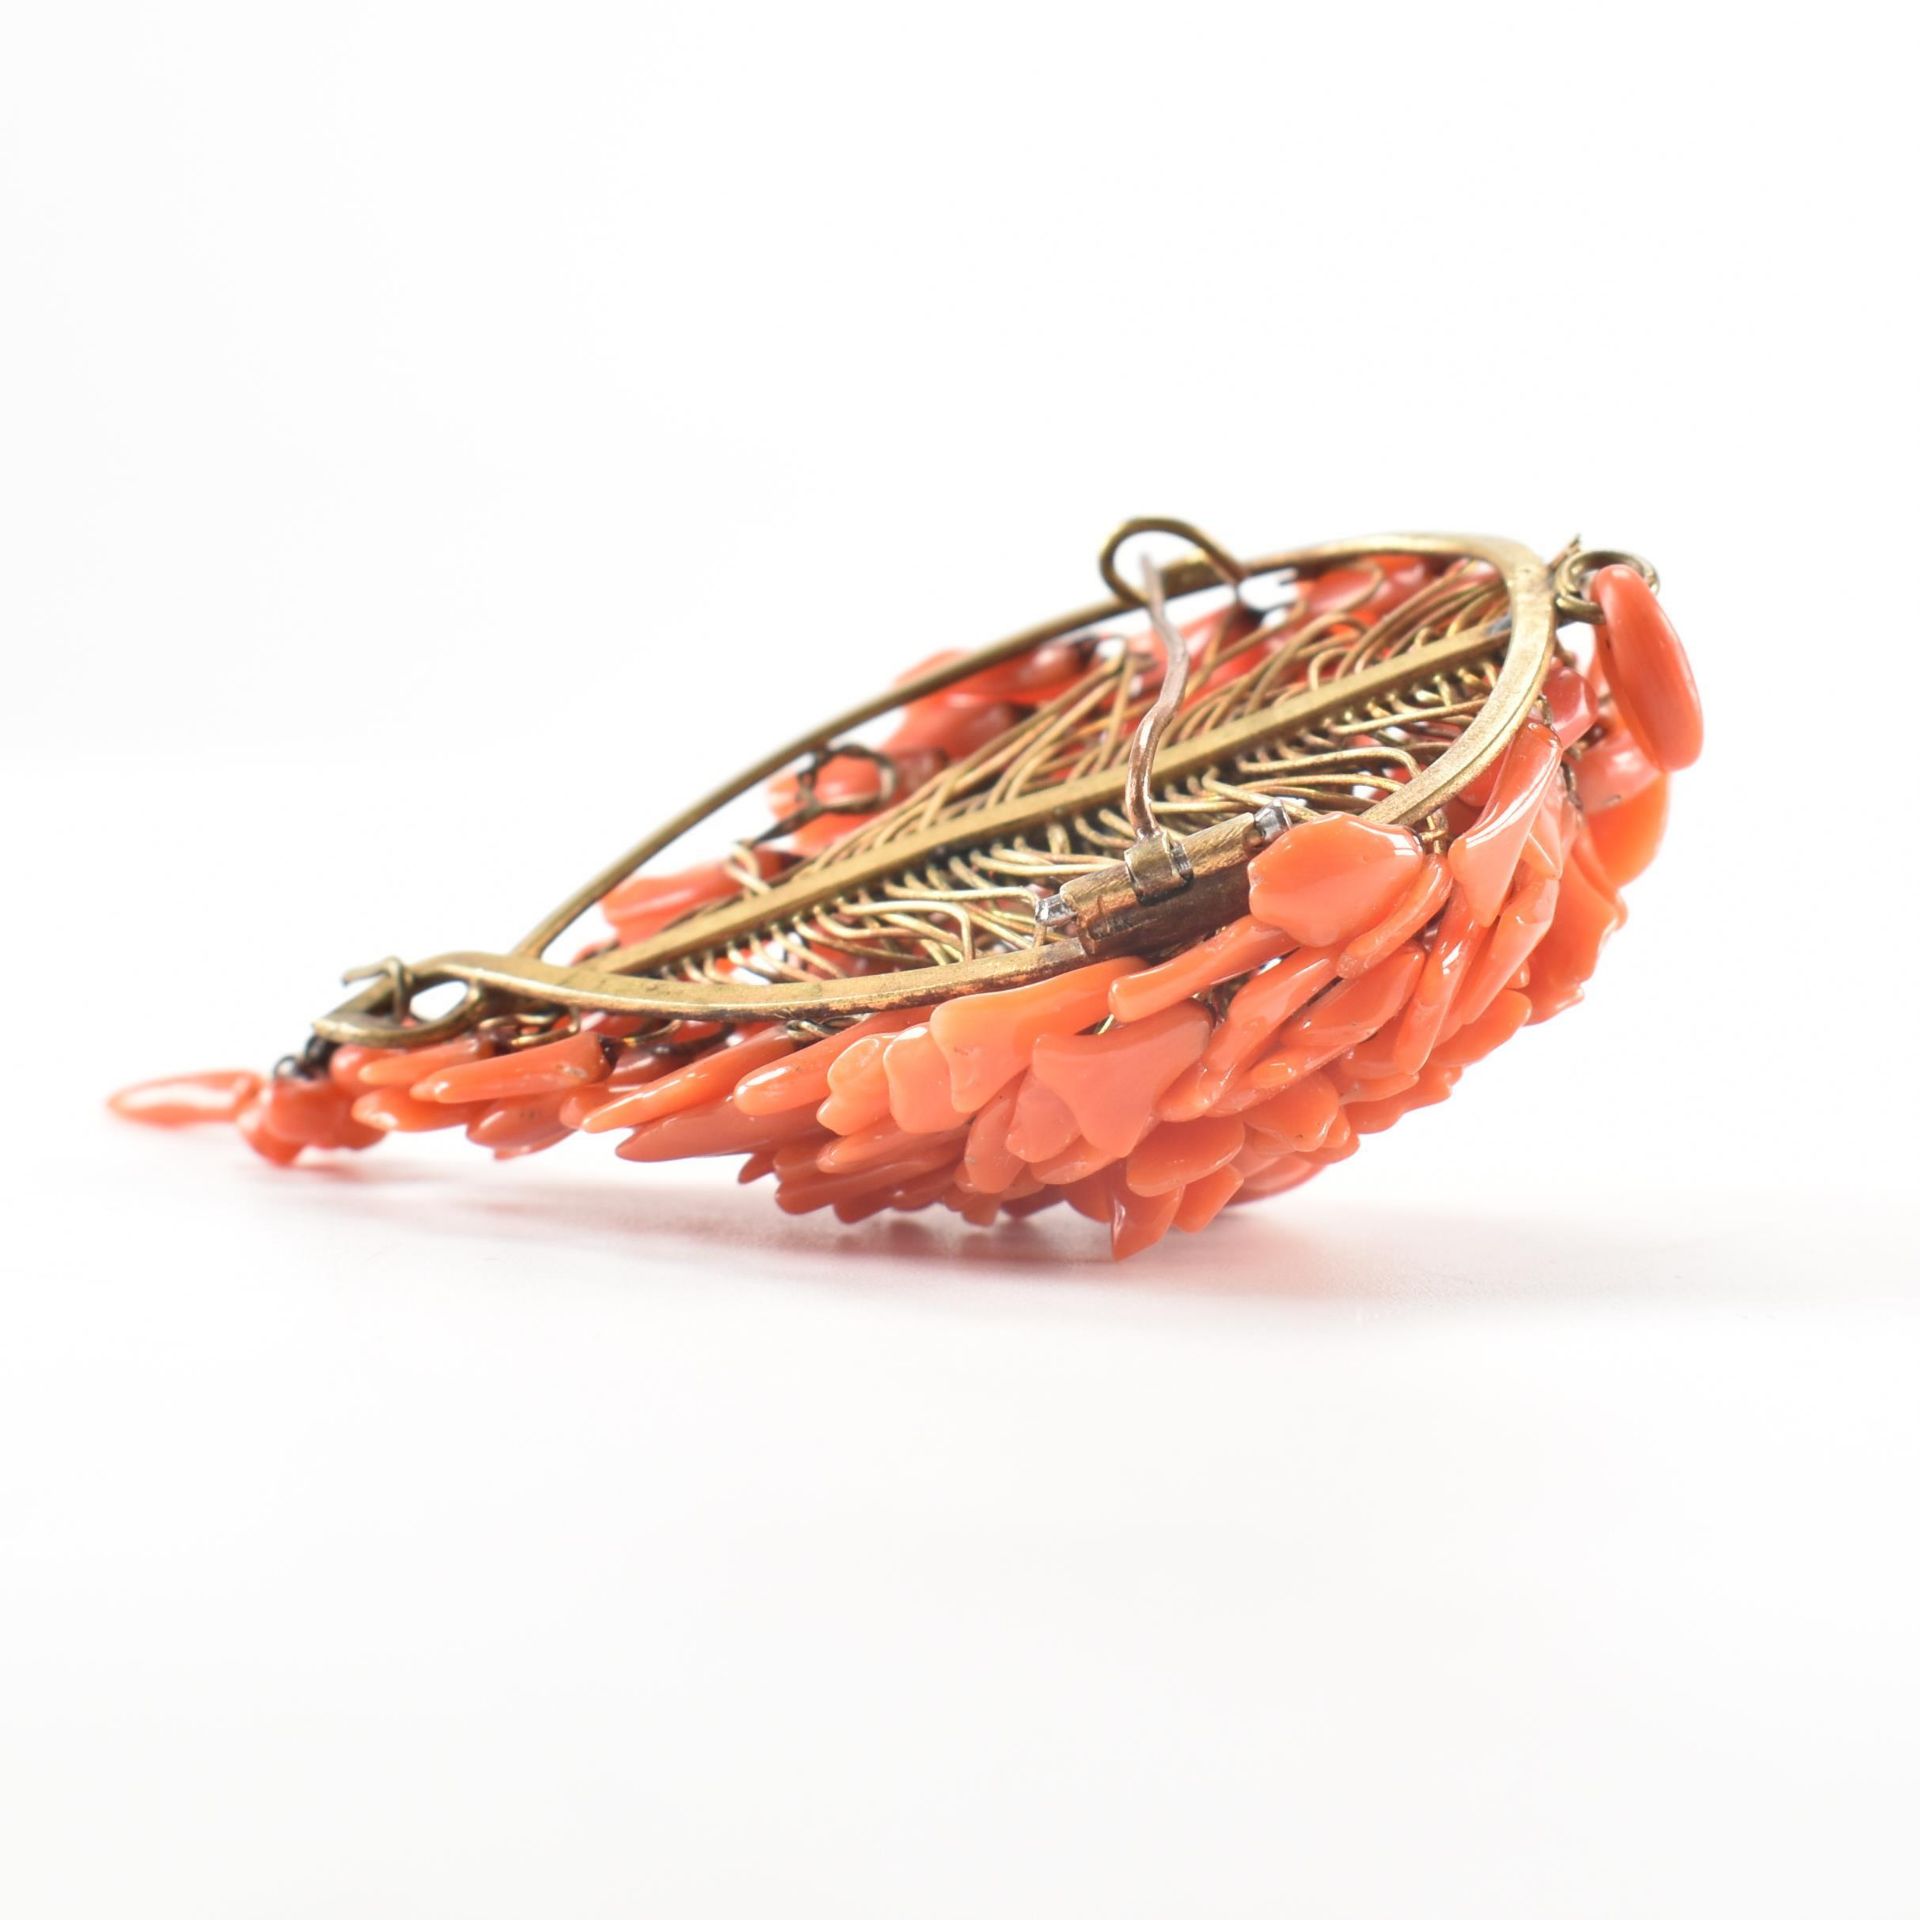 VICTORIAN GILT METAL & CORAL BROOCH - Image 5 of 6